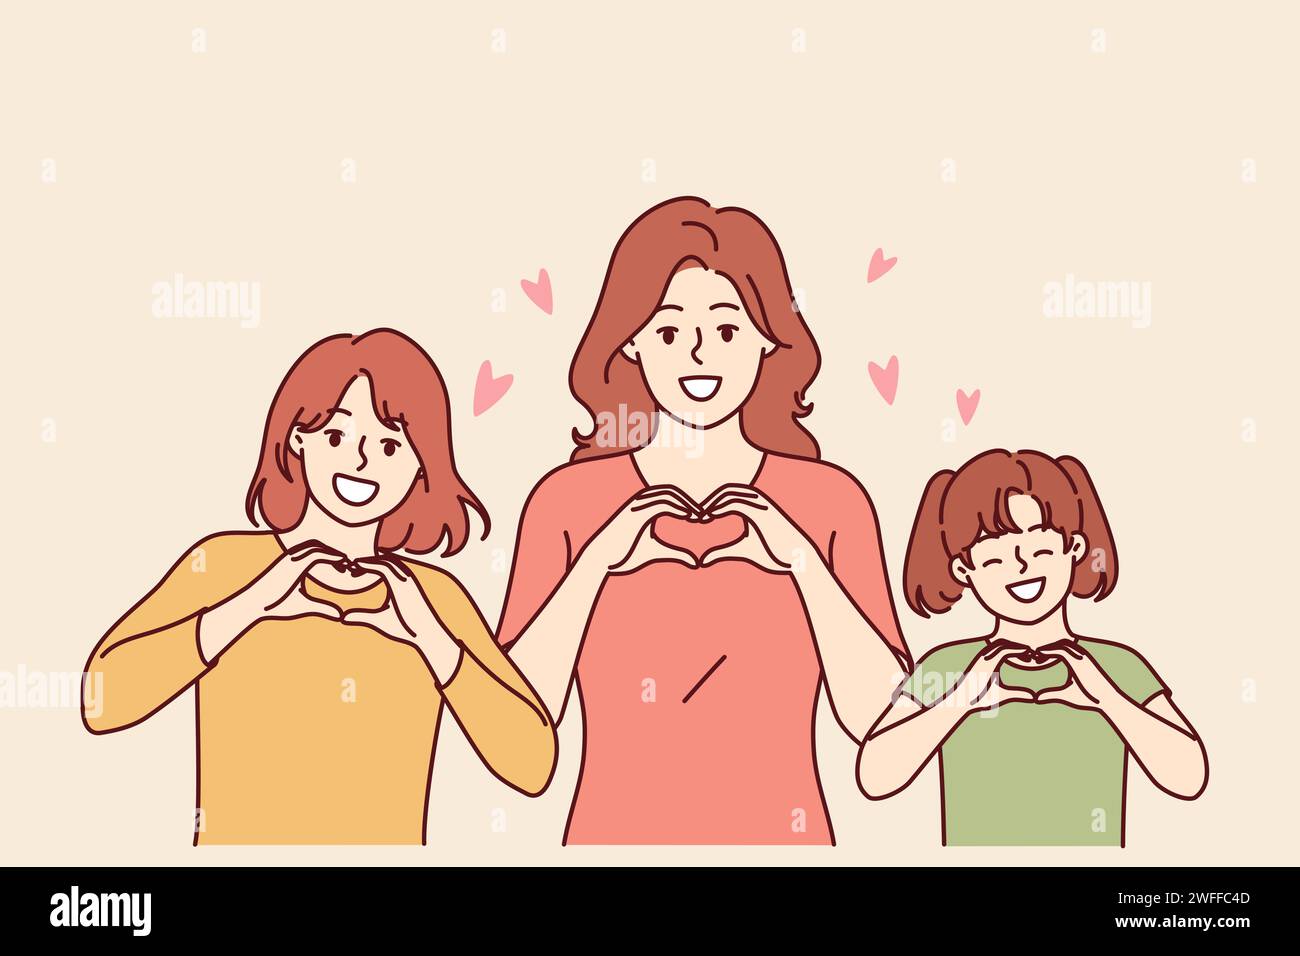 Congratulations on women day from women of different ages showing heart gesture and congratulating you on march 8th. Mom and daughters celebrate international women day or take pride in family unity Stock Vector